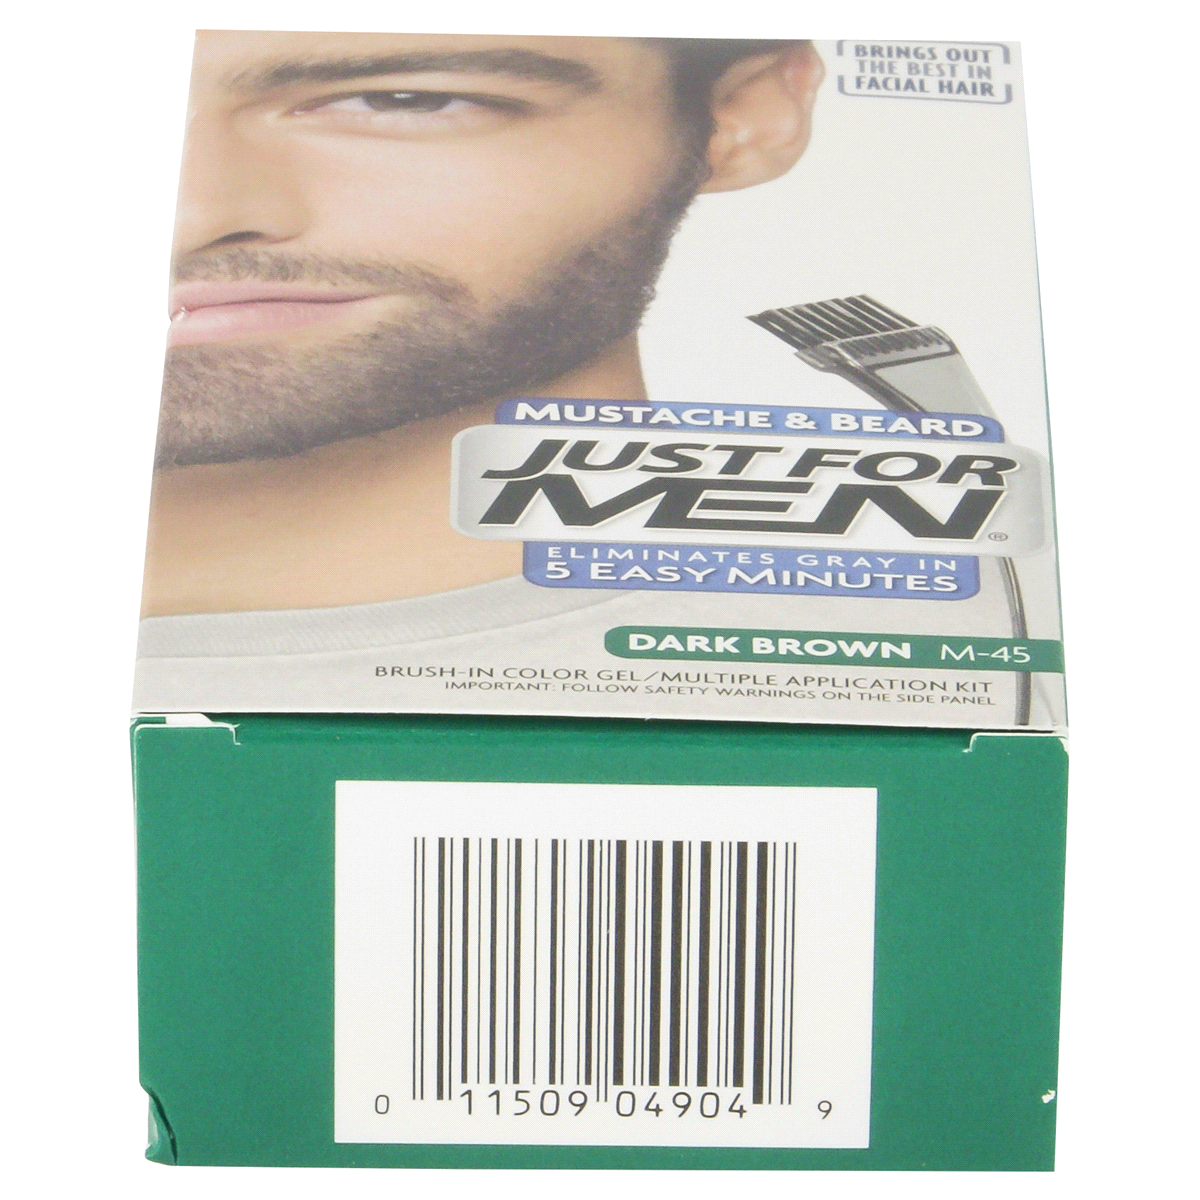 slide 19 of 94, Just for Men Mustache & Beard Coloring for Gray Hair with Brush Included - Dark Brown M45, 1 ct